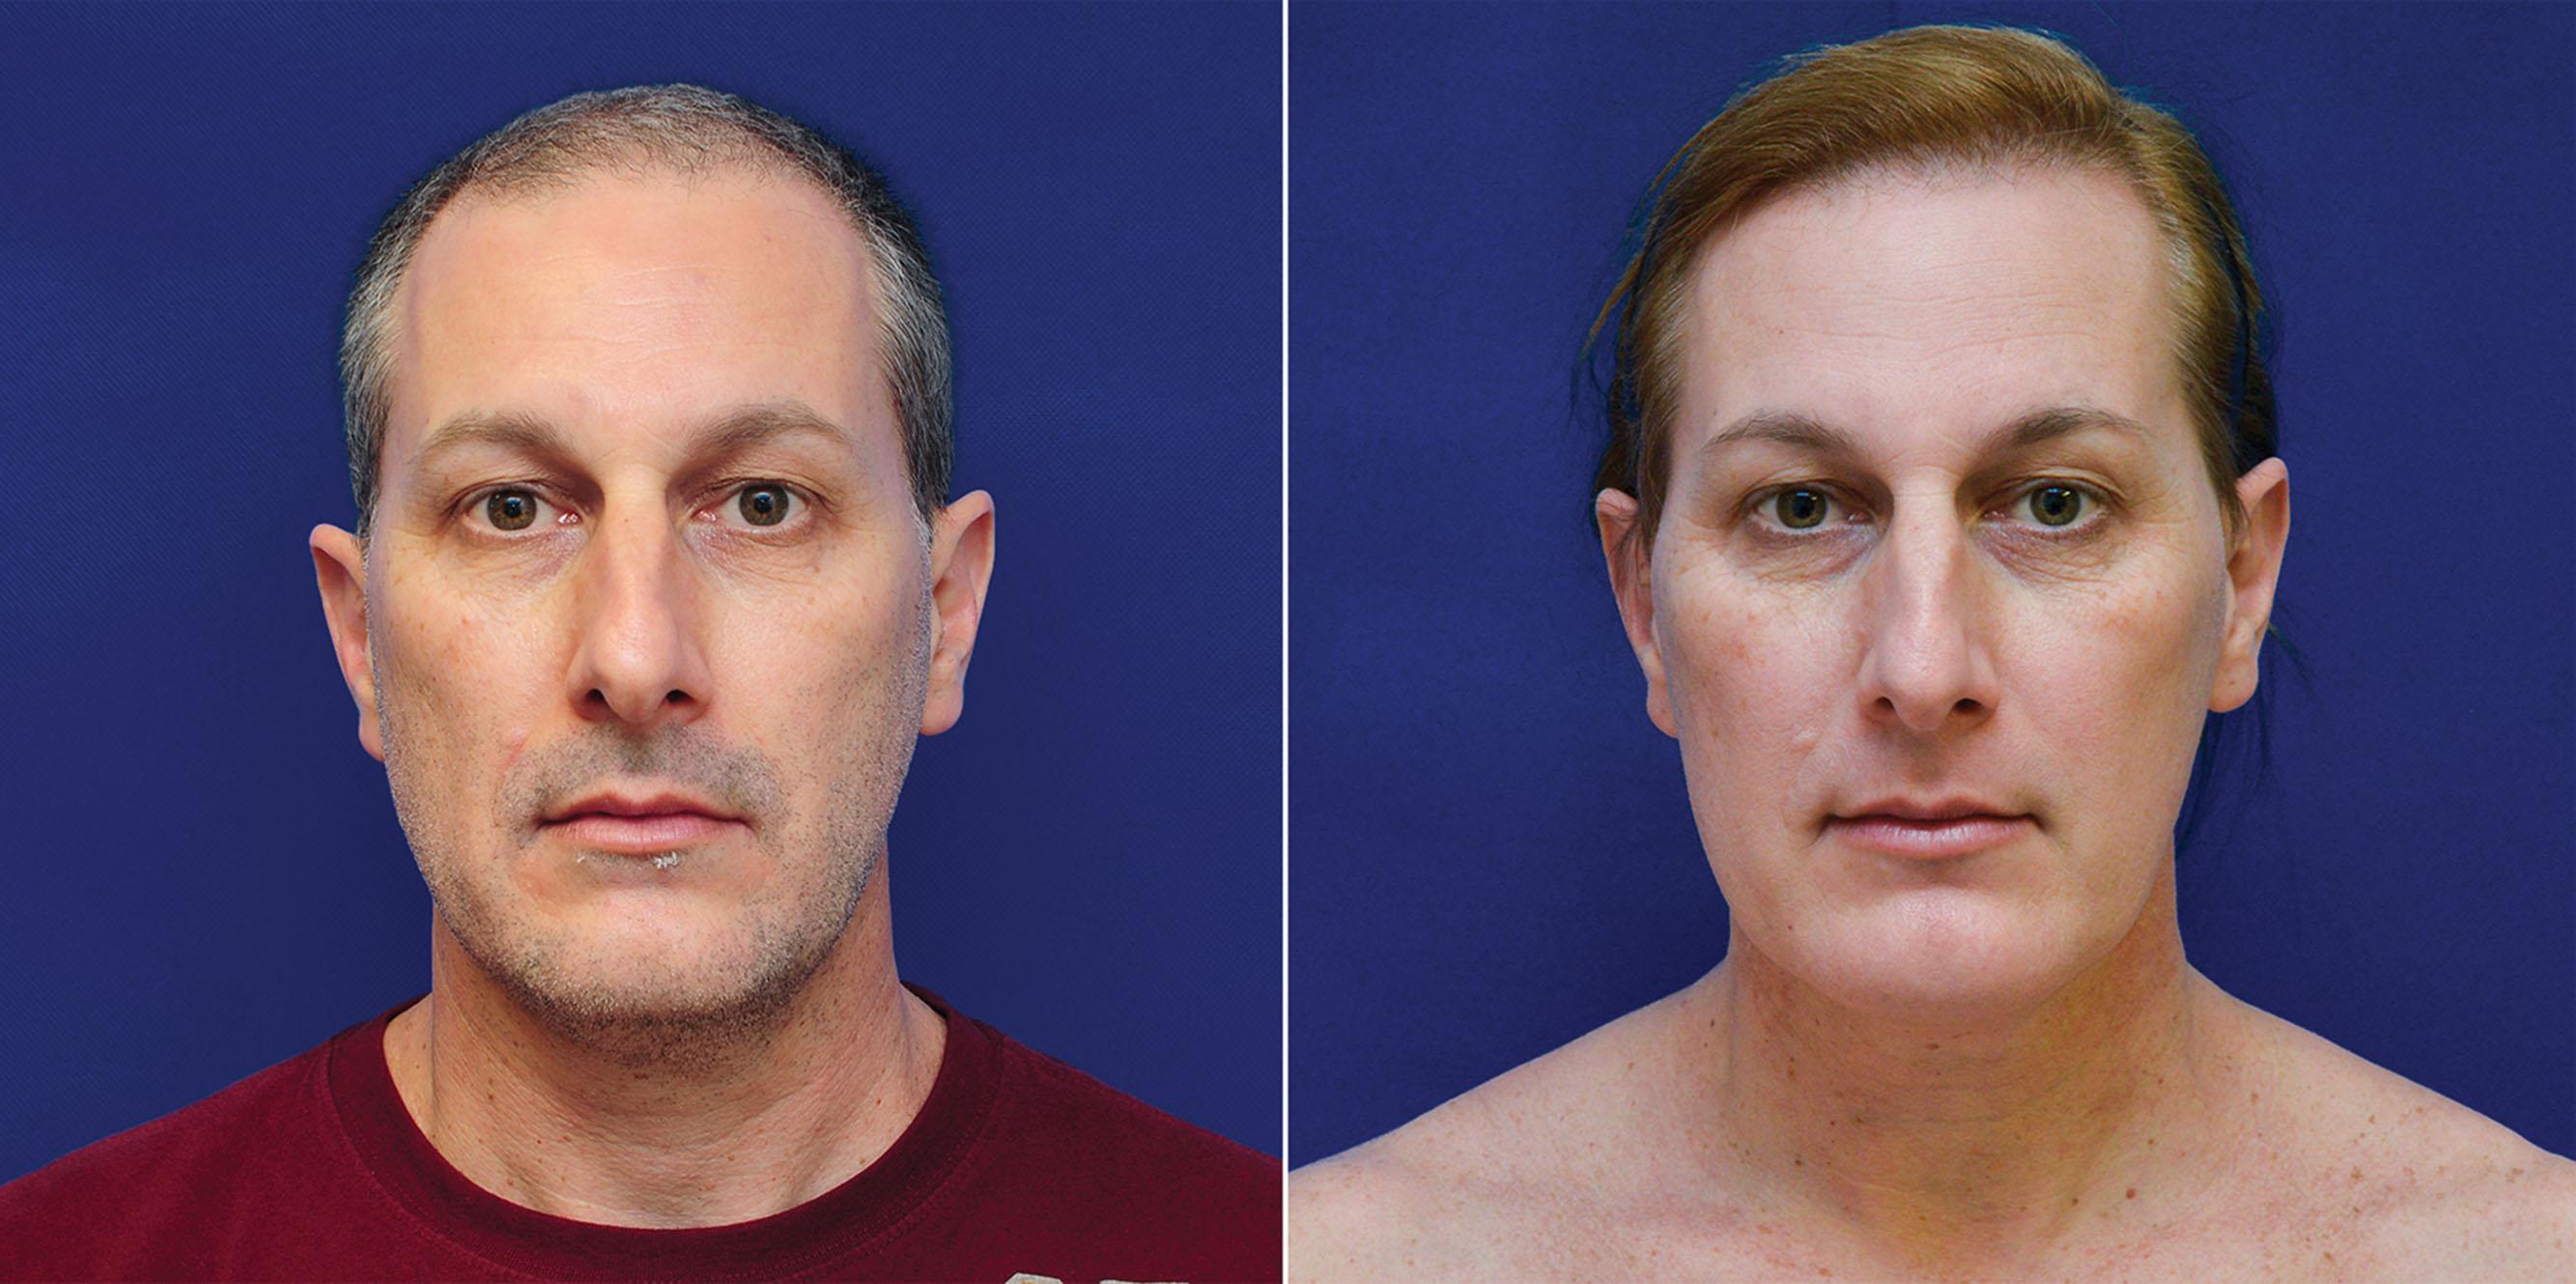 Figure 17.7, Clinical case before and after hormone therapy (HT). (Left) Patient before HT. (Right) Patient after 1 year with HT and before FGCS. Note the change in secondary aspects (hair, facial hair, skin texture, and facial fat) before any type of surgical procedure.